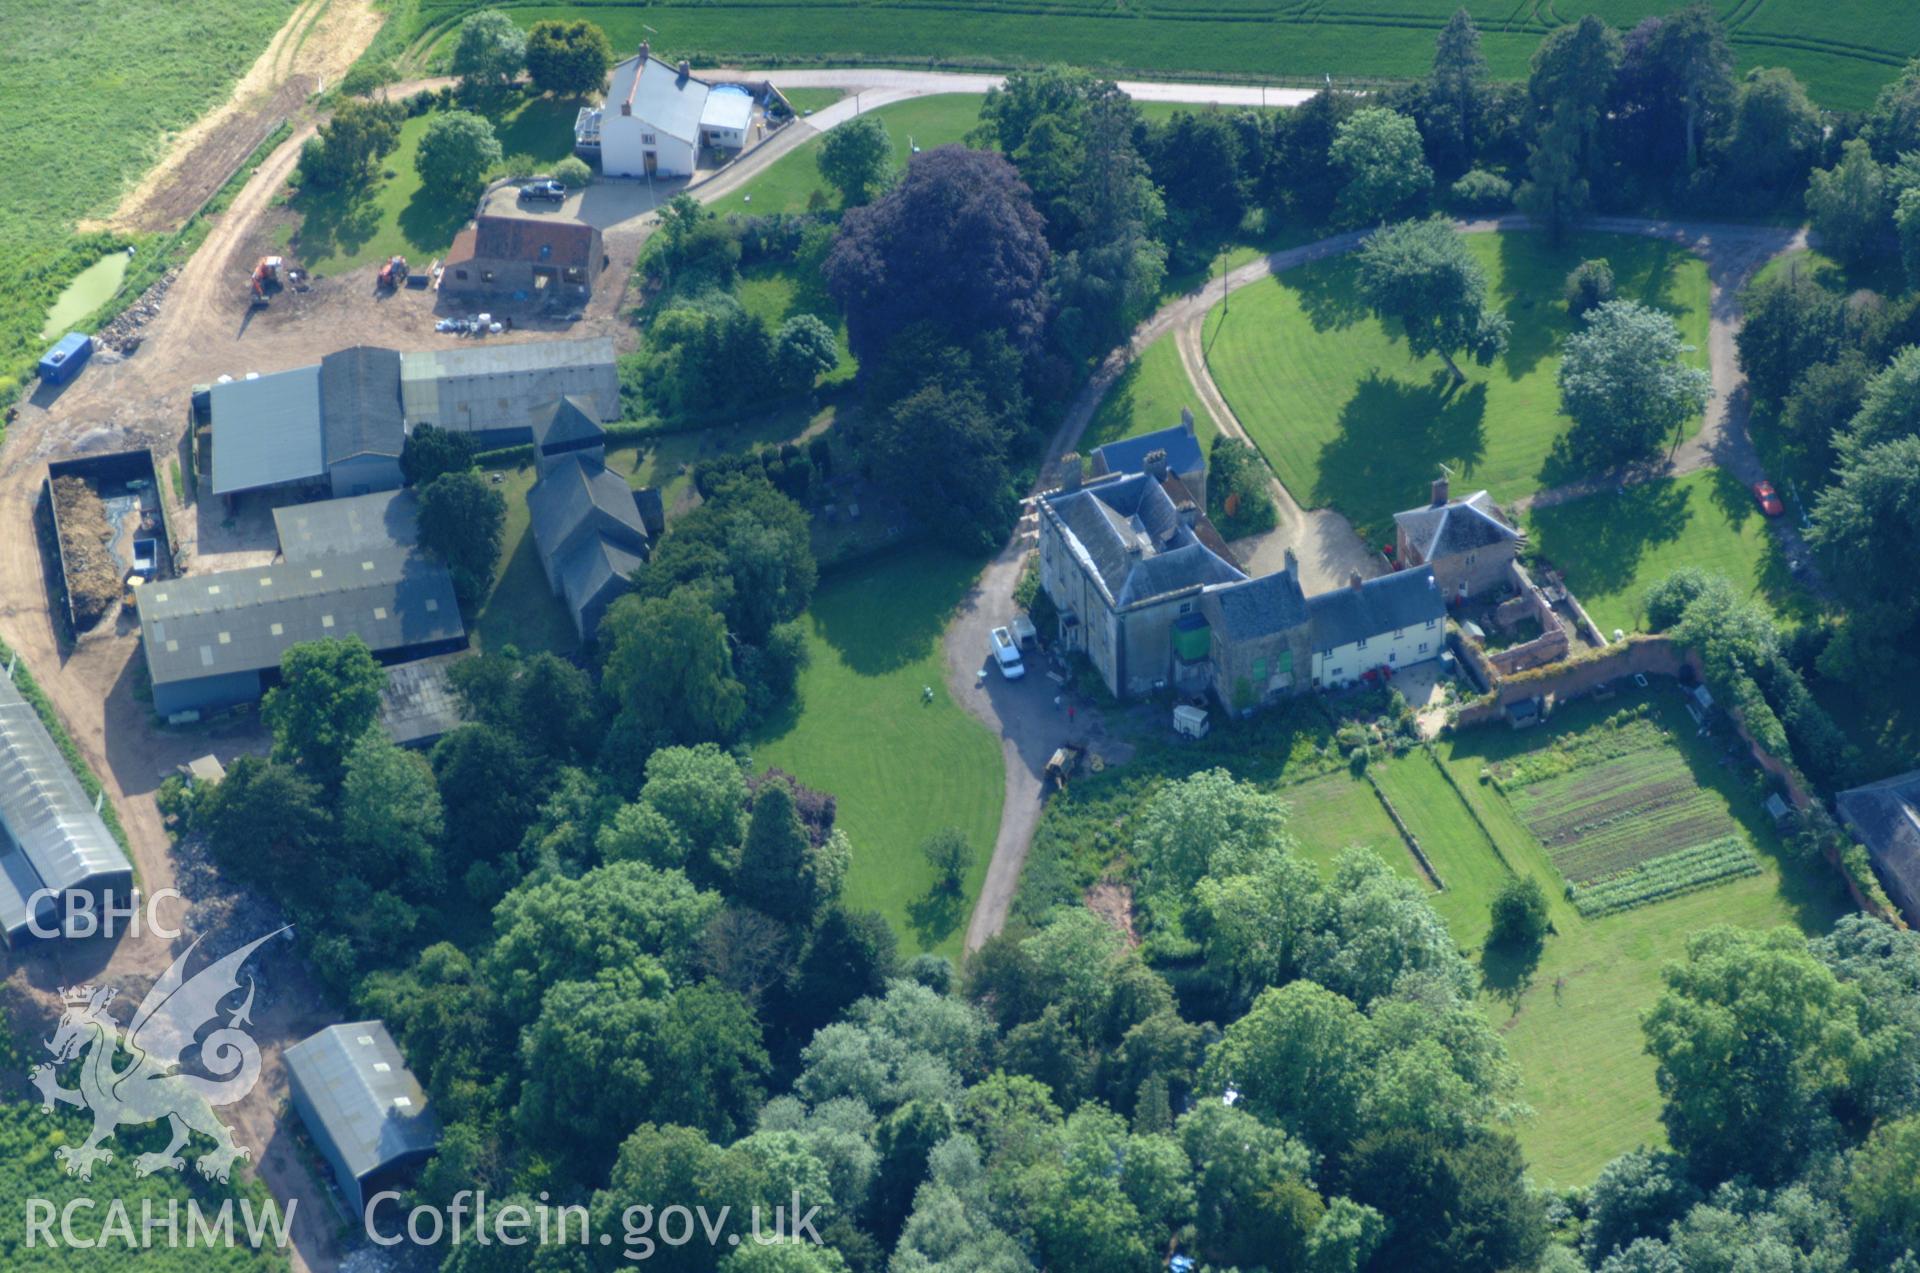 RCAHMW colour oblique aerial photograph of Wonastow Court taken on 02/06/2004 by Toby Driver